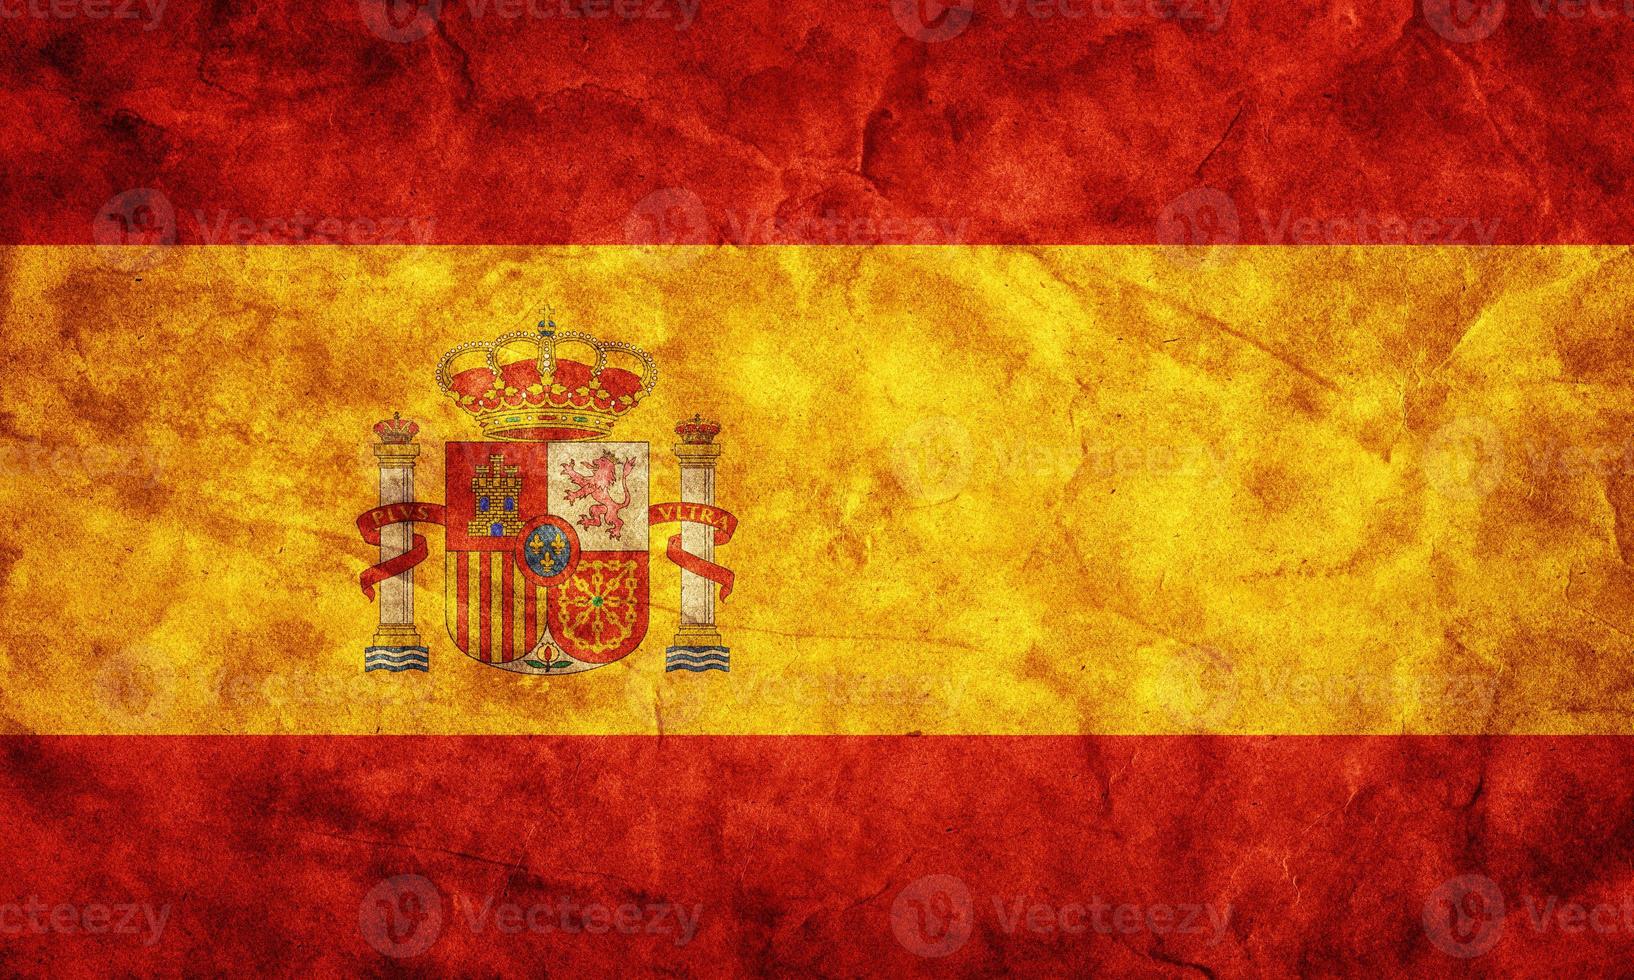 Spain grunge flag. Item from my vintage, retro flags collection photo